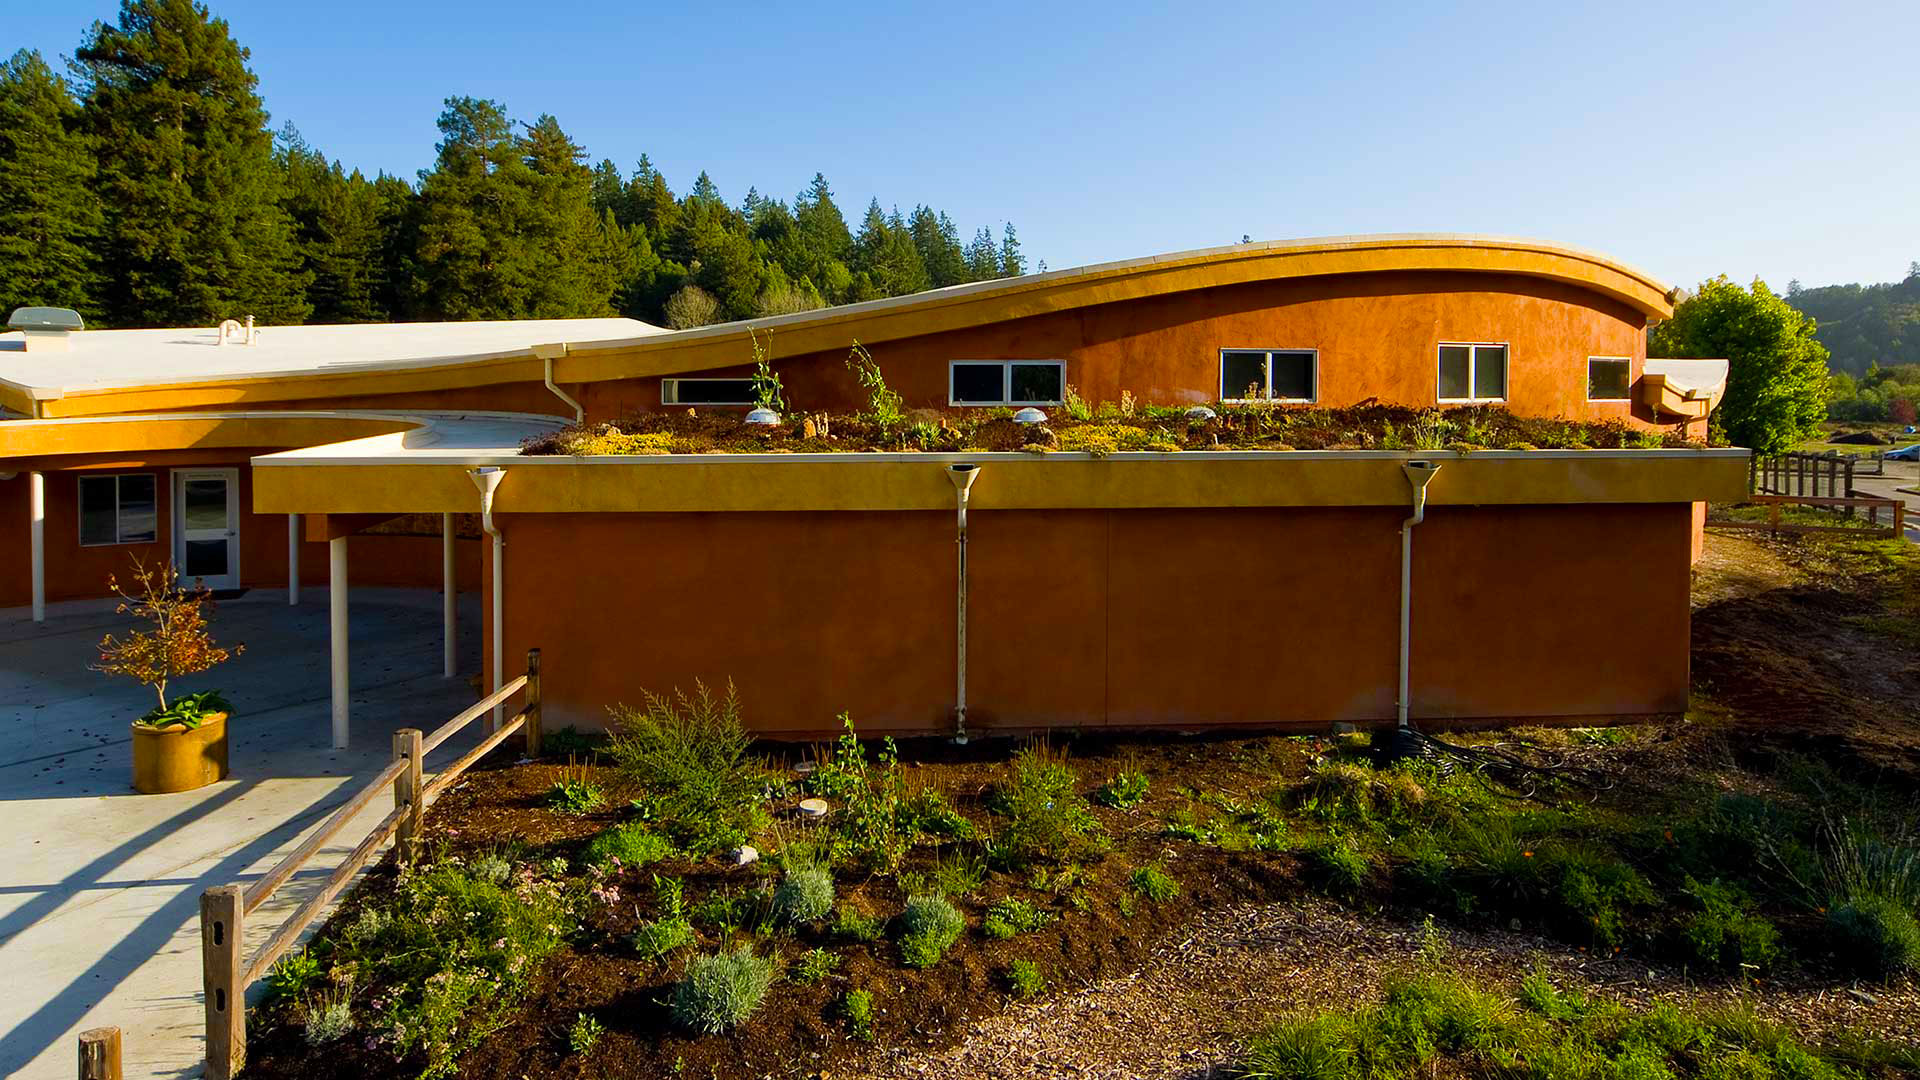 Exterior of school with garden space and green roof above.